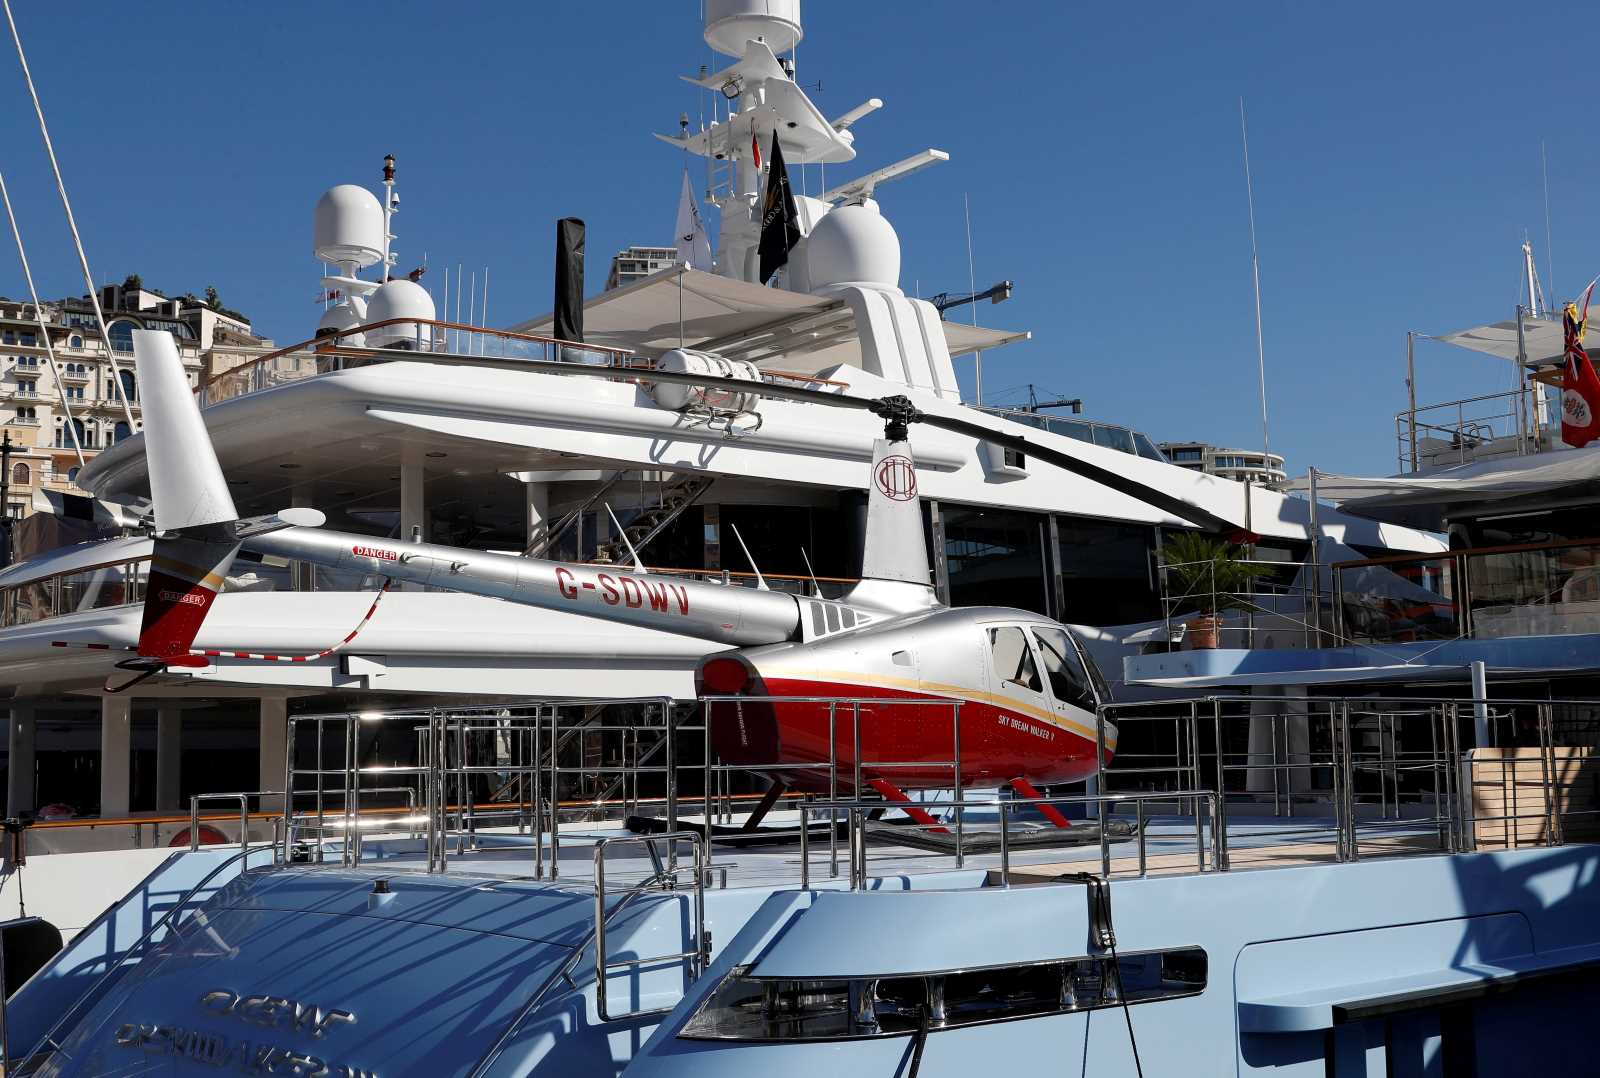 Helicopter on a luxury boat during the Monaco Yacht Show in 2018.